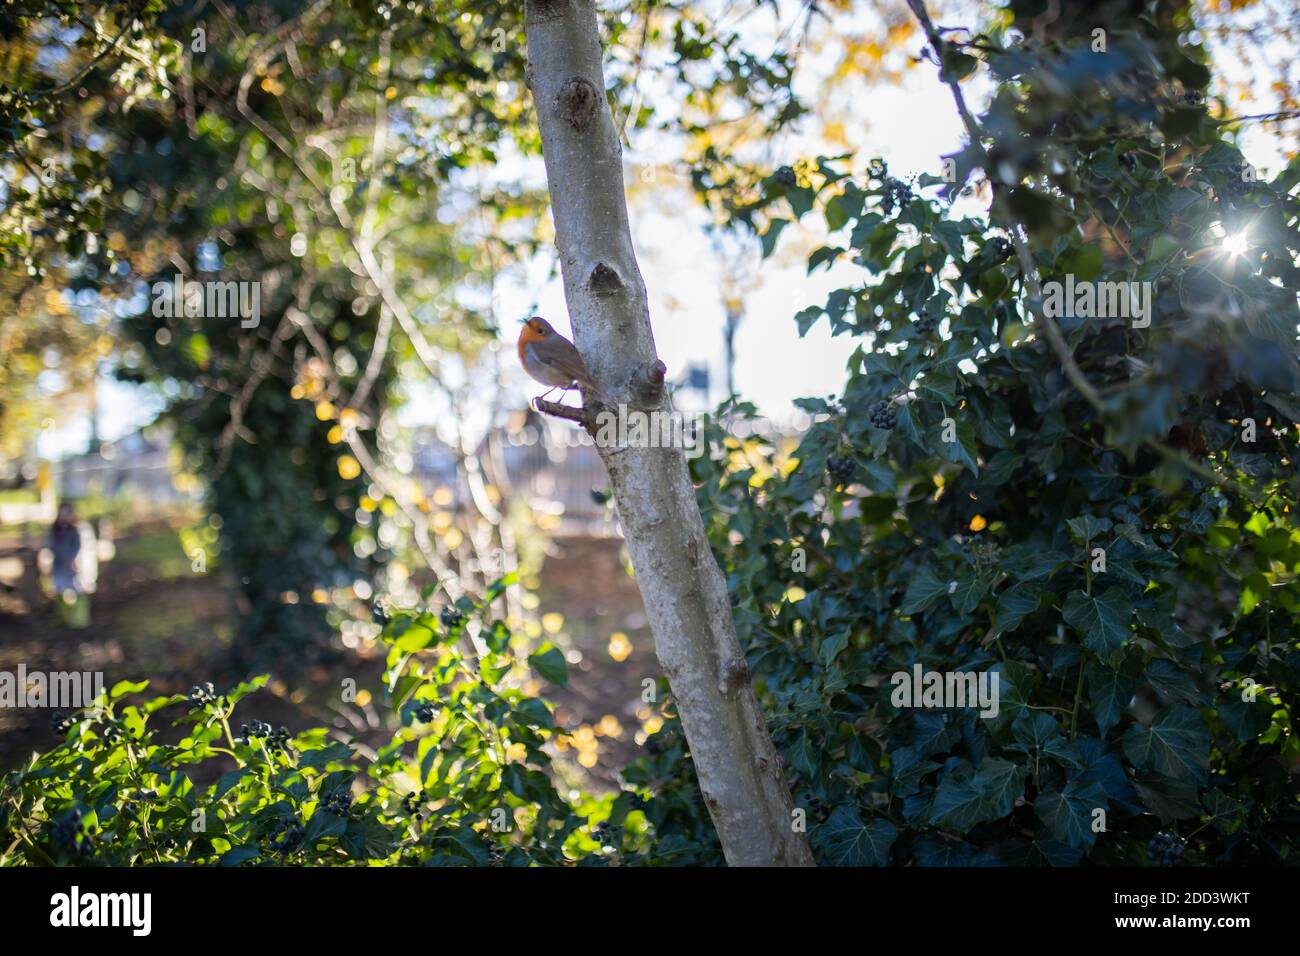 Majestic robin standing on the small branch of a tree Stock Photo